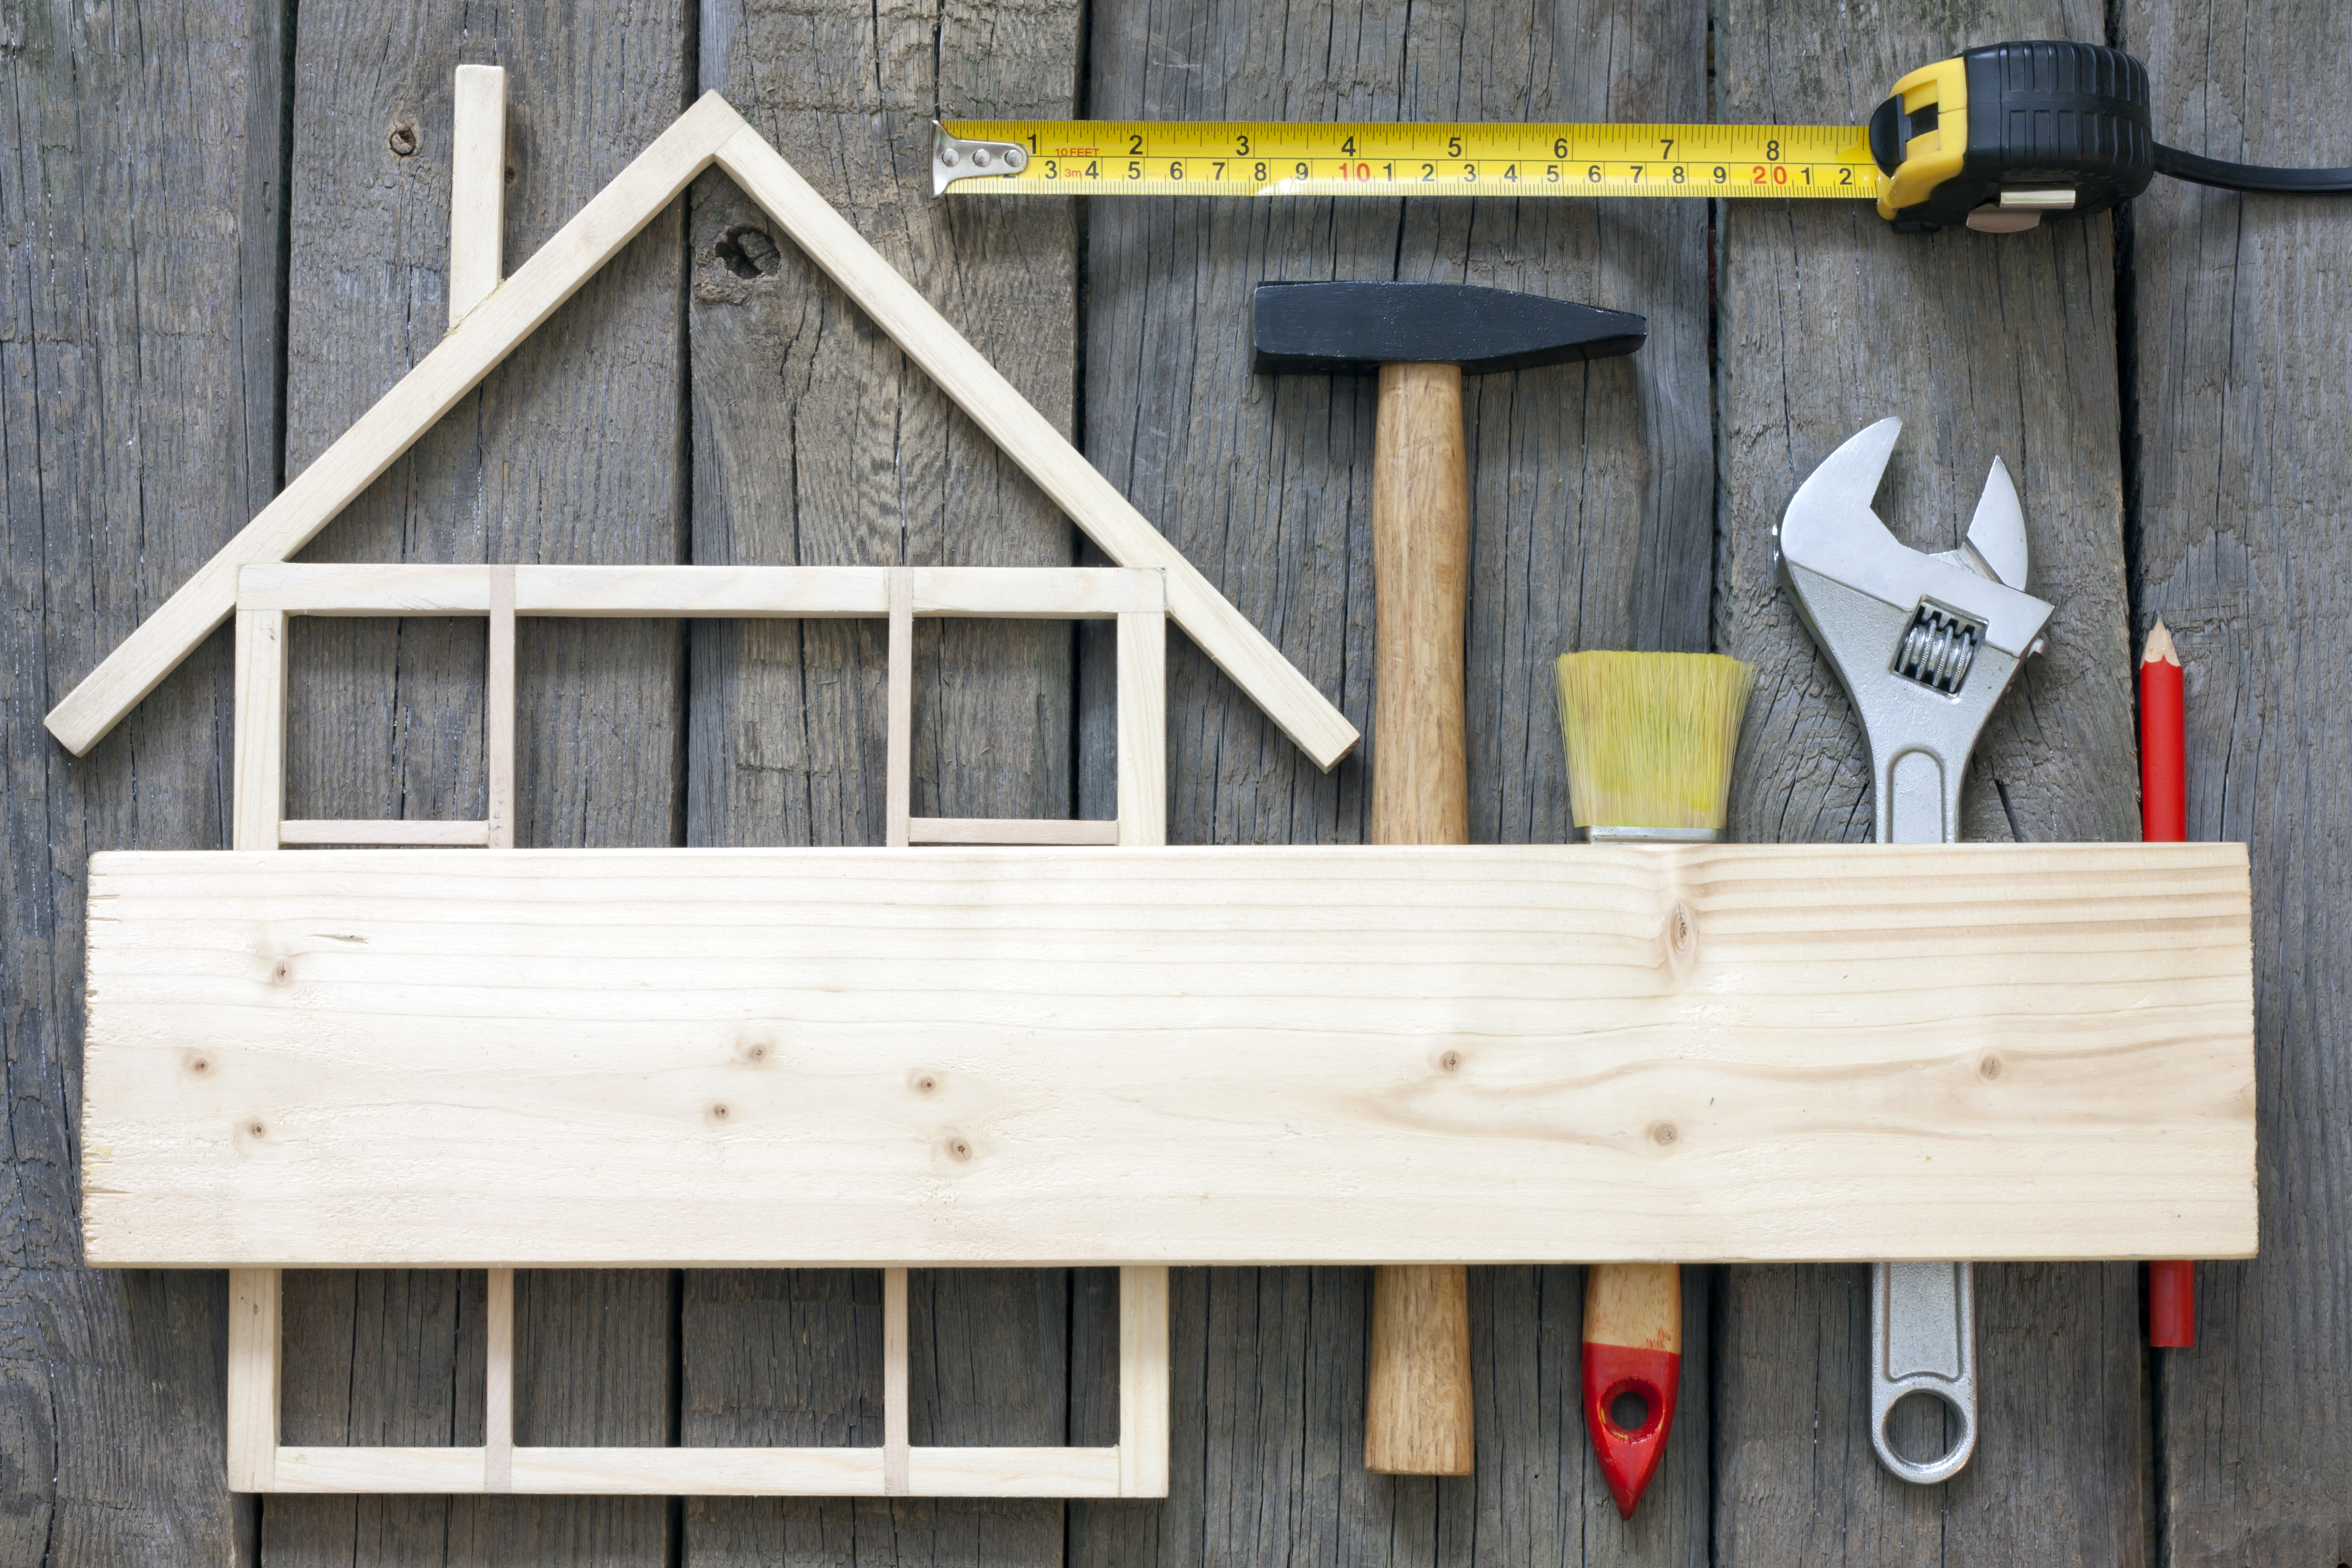 image of a wood made house frame and tool - raises the question if Renovation is the Right Property Investing Strategy For You